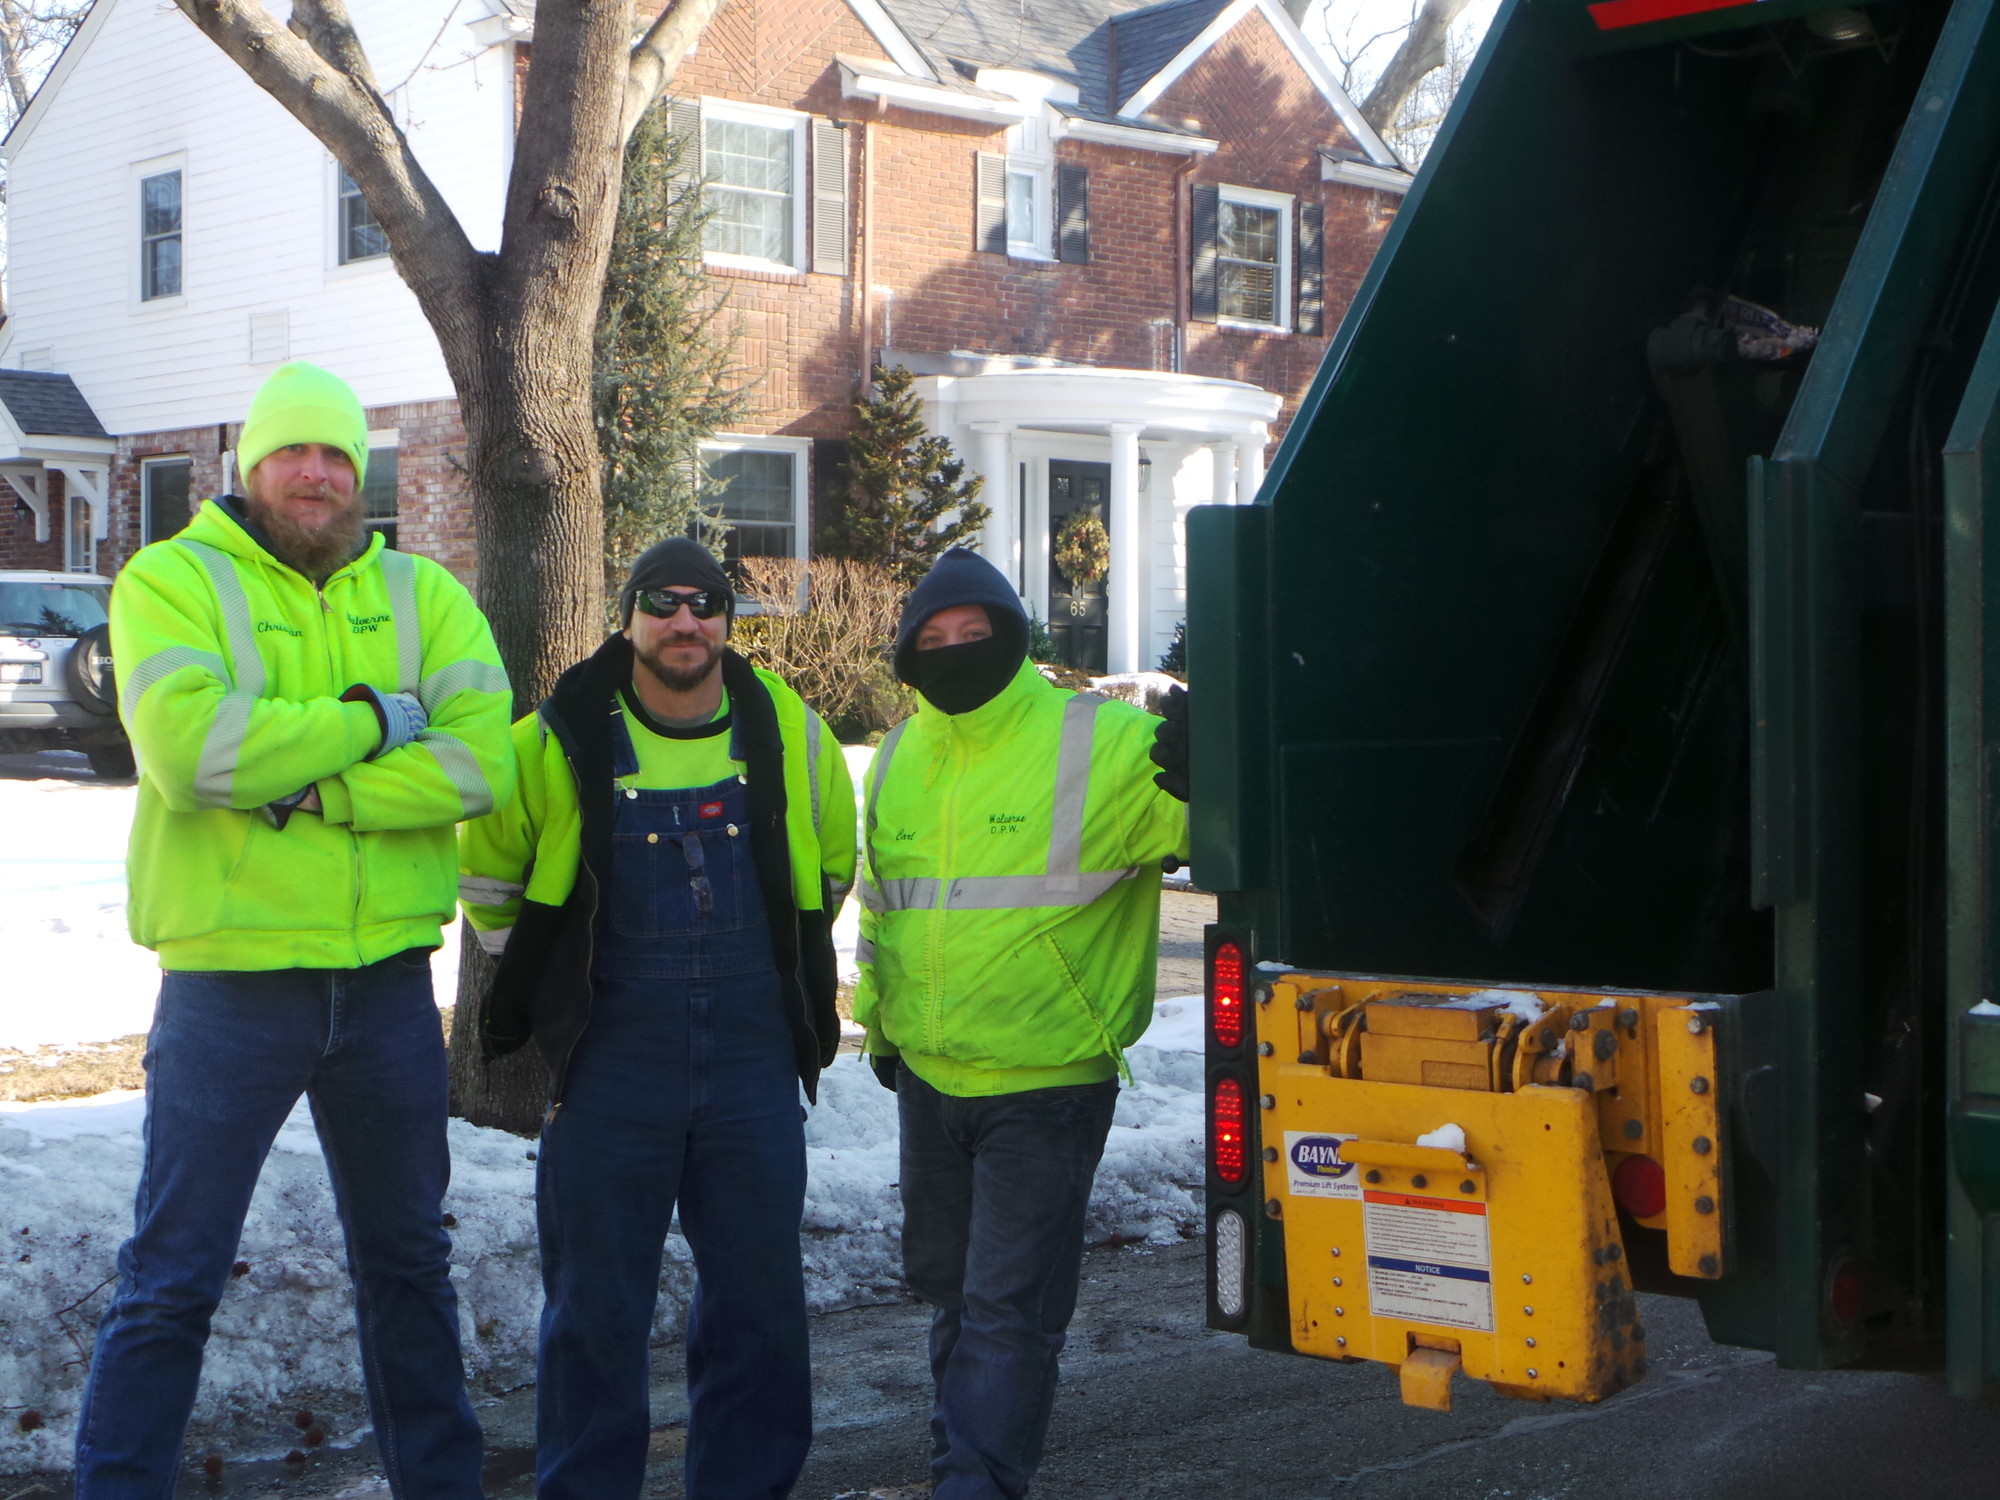 From Malverne’s Department of Public Works, Christian Stolba, Dave Terrizzi and Carl Guadagno, left to right, manage the Friday morning garbage pick-up with a smile and a great sense of comradery despite the weather.